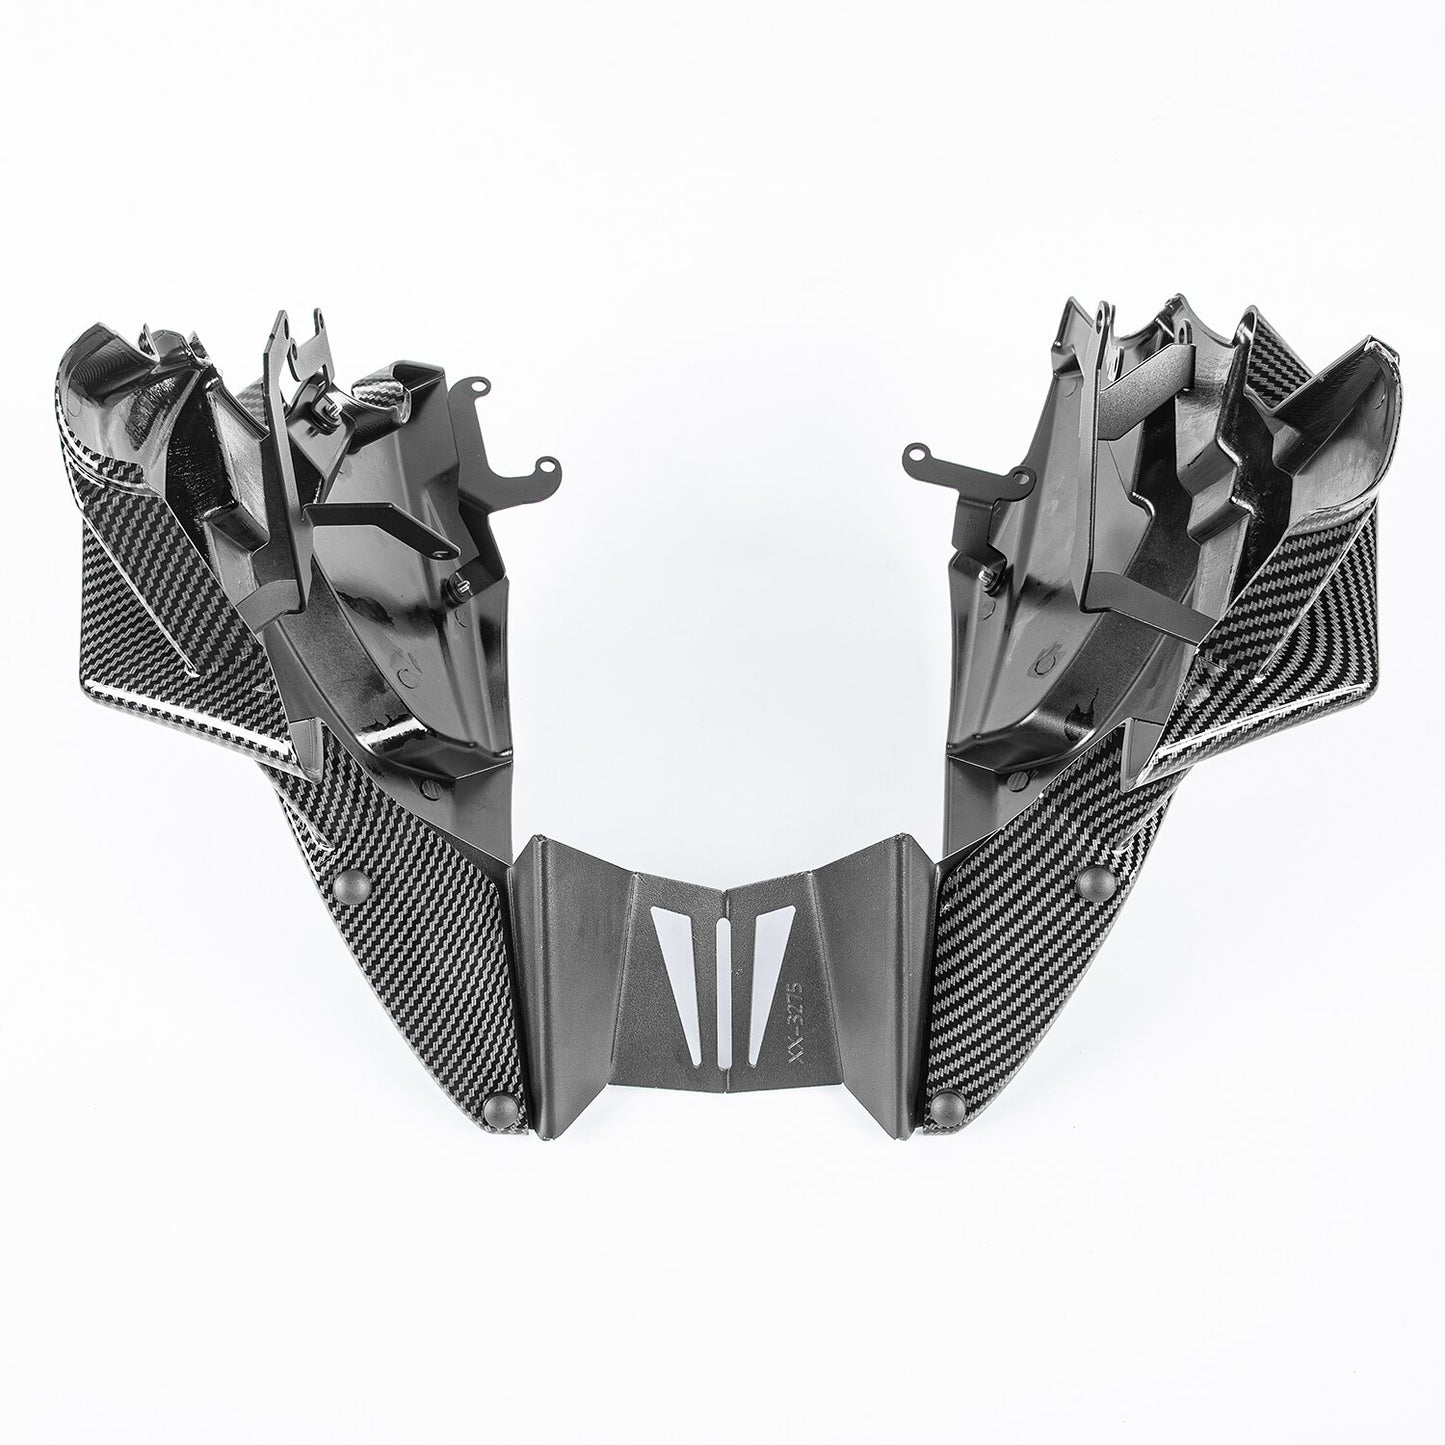 MT09 Belly Pan Lower Engine Spoiler Fairing For Yamaha MT-09 MT 09 SP 2021-2023 Motorcycle Panel Frame Protection Cover Cowl